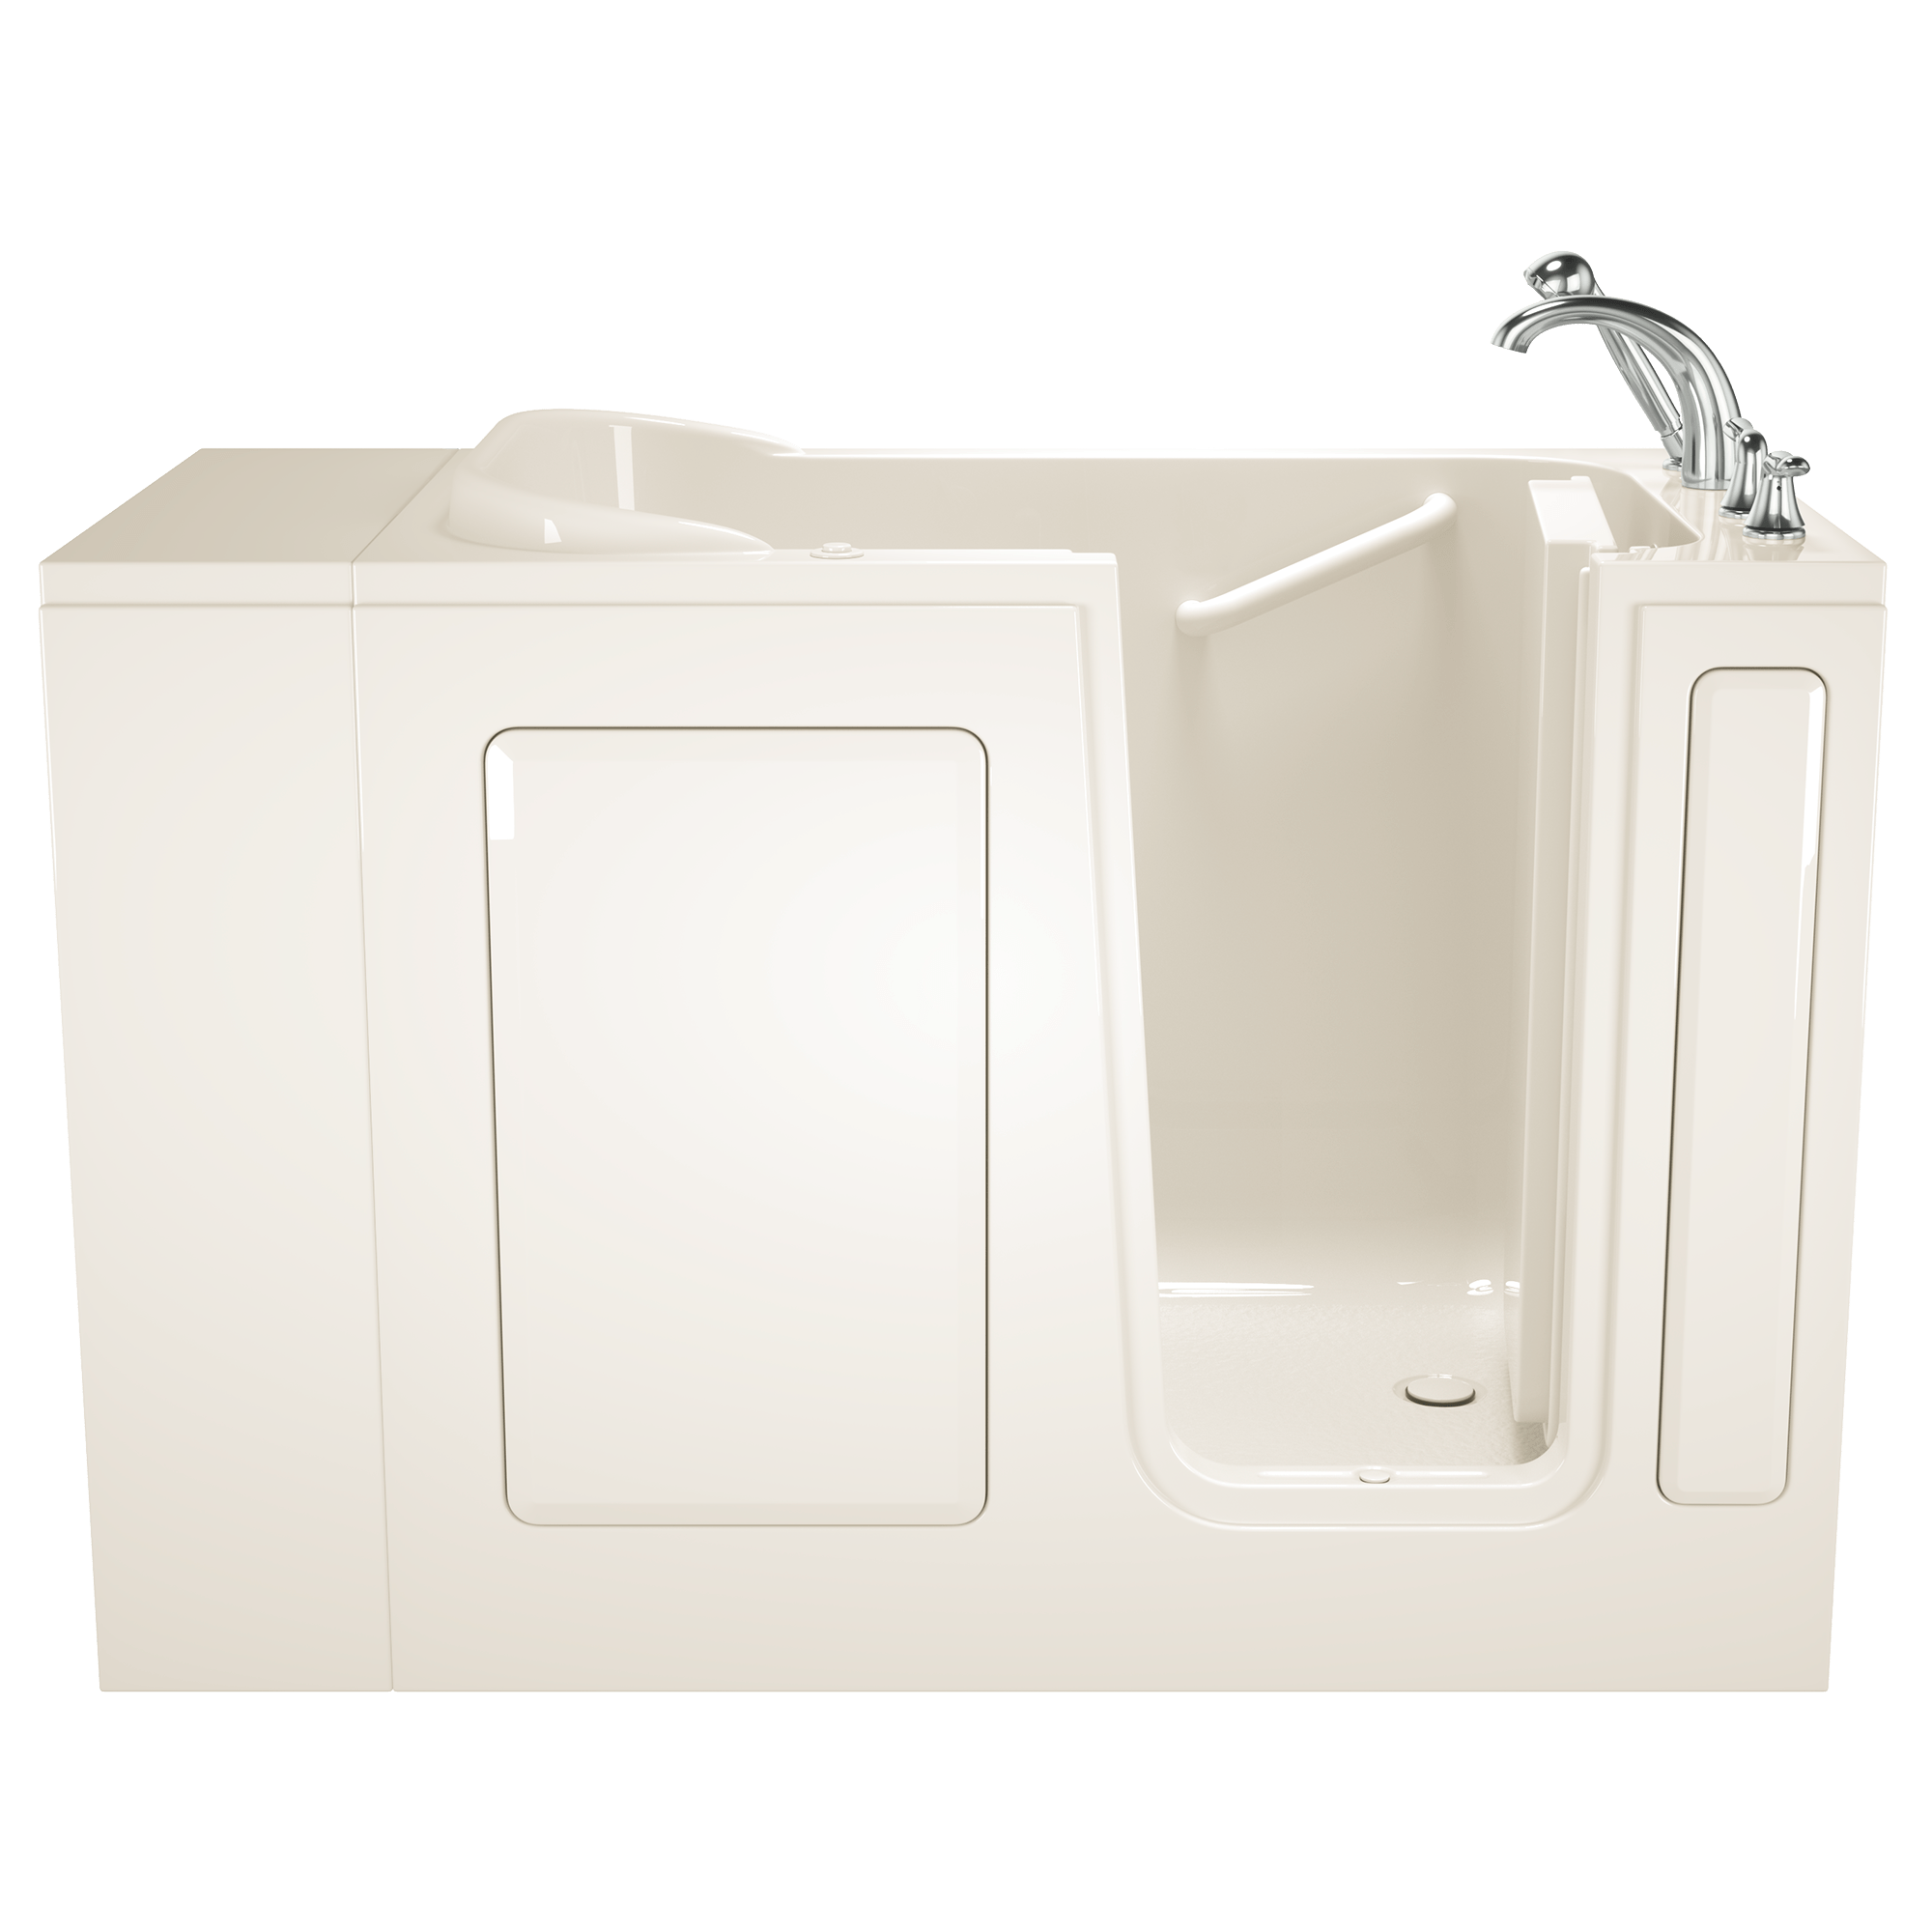 Gelcoat Entry Series 48 x 28-Inch Walk-In Tub With Air Spa System – Right-Hand Drain With Faucet